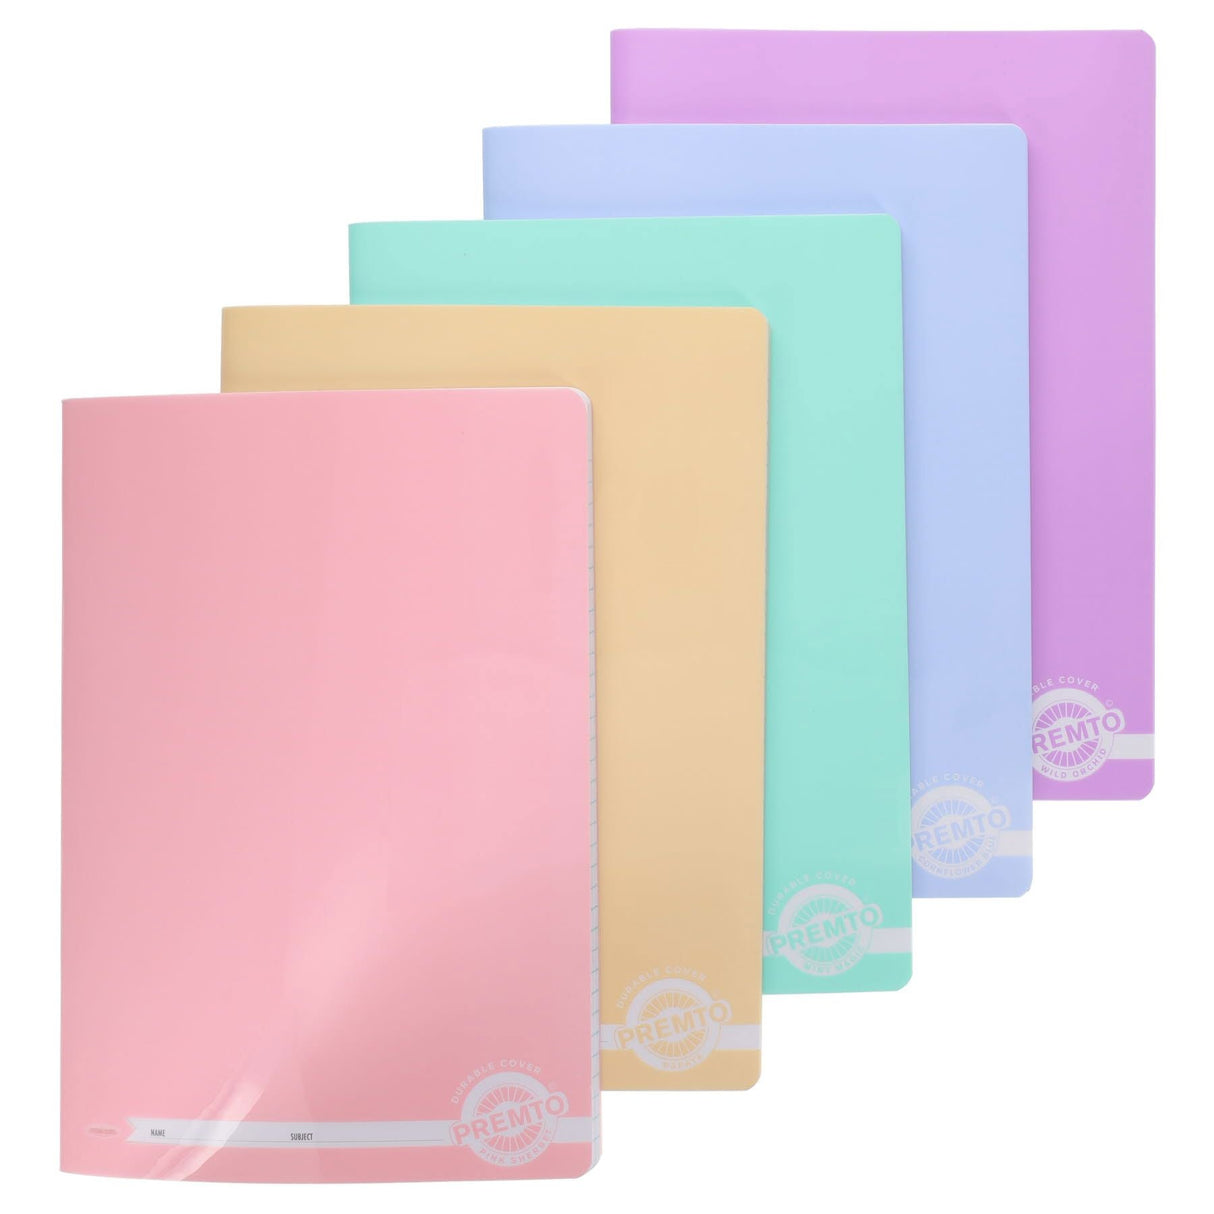 Premto A4 Durable Cover Manuscript Book - 160 Pages - Pastel Wild Orchid | Stationery Shop UK